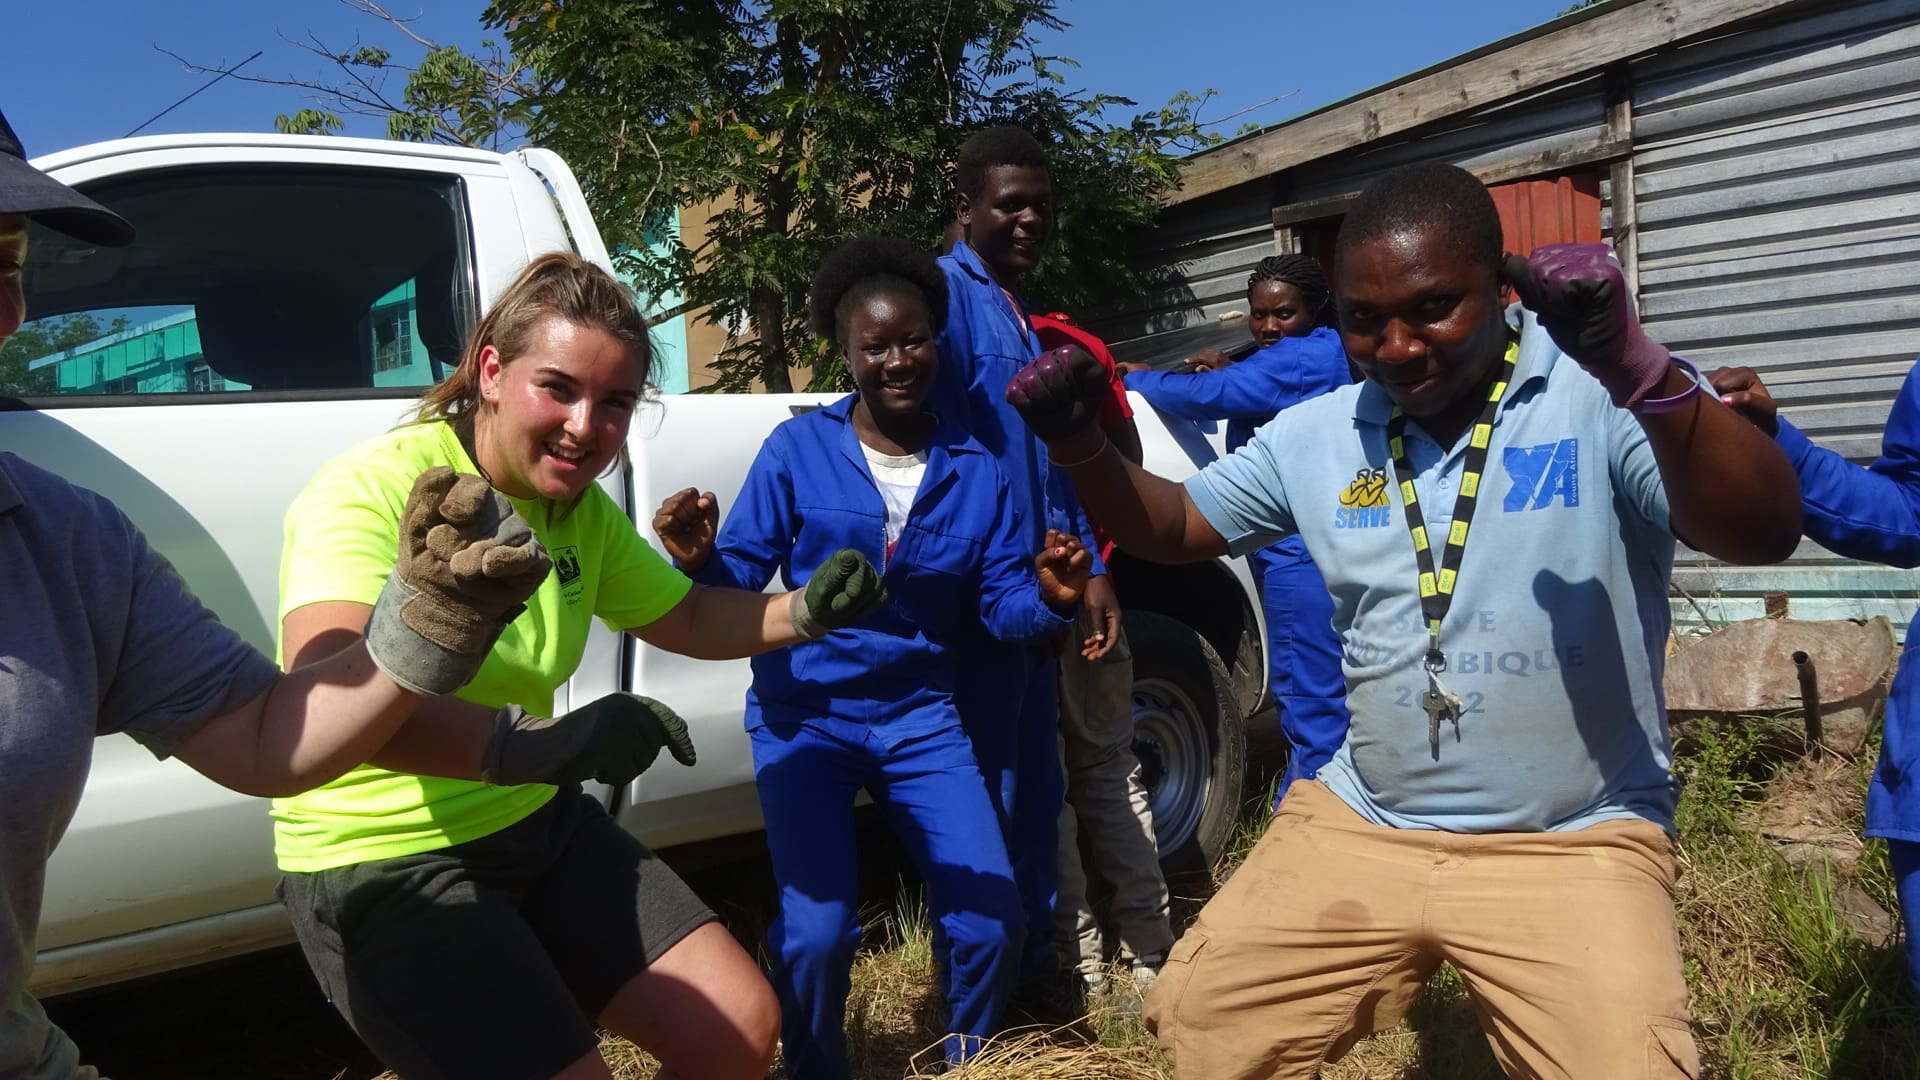 SERVE volunteers with Young Africa Students in Mozambique